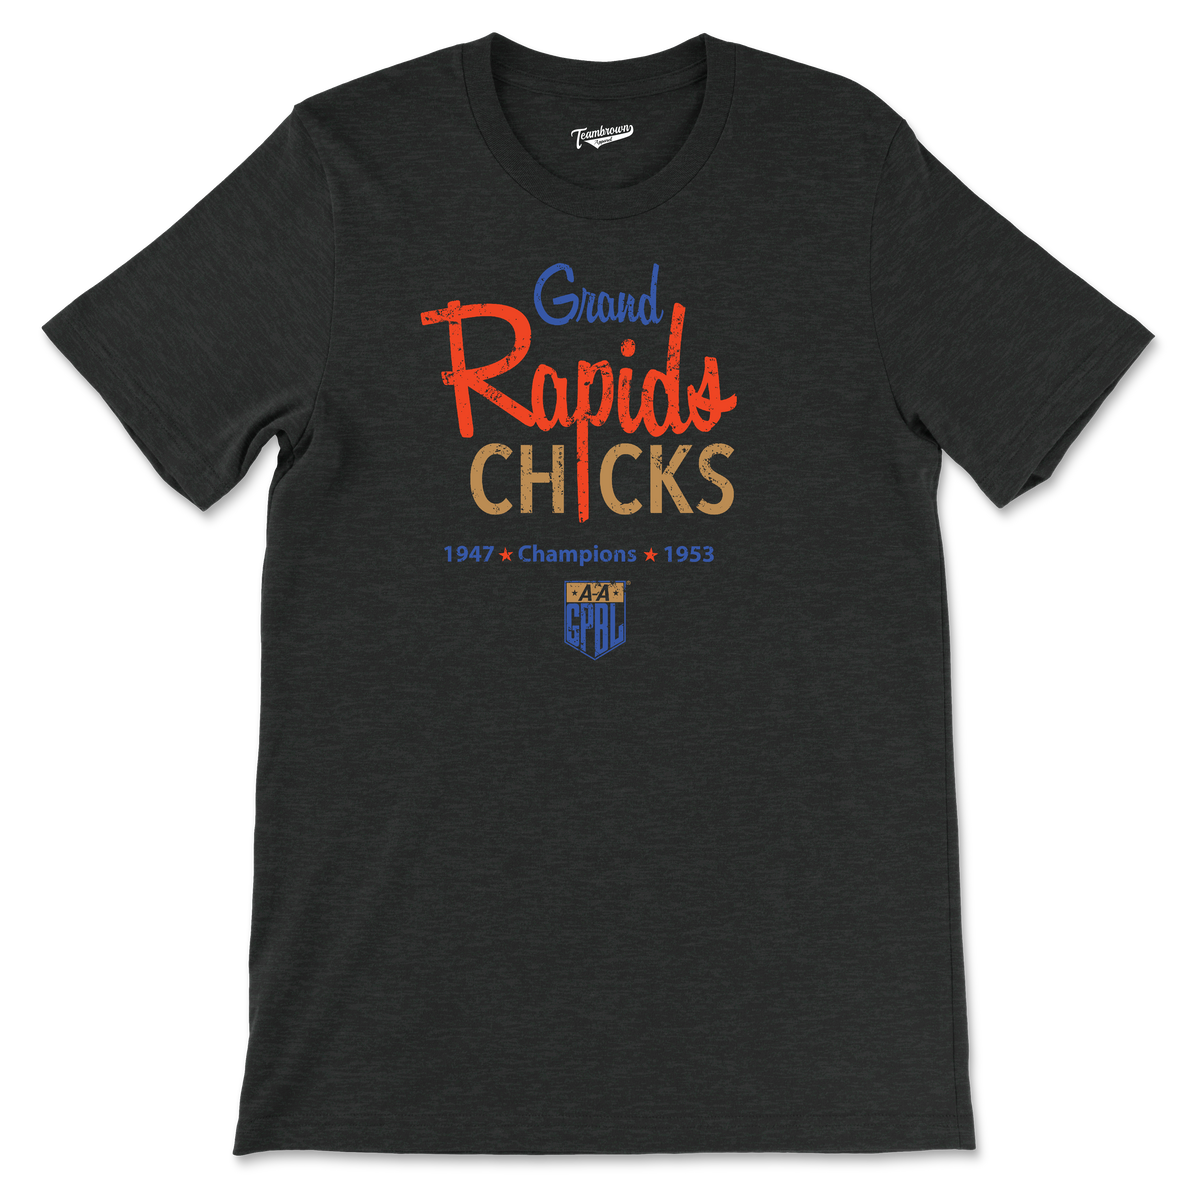 Grand Rapids Chicks Champions - Unisex T-Shirt | Officially Licensed - AAGPBL